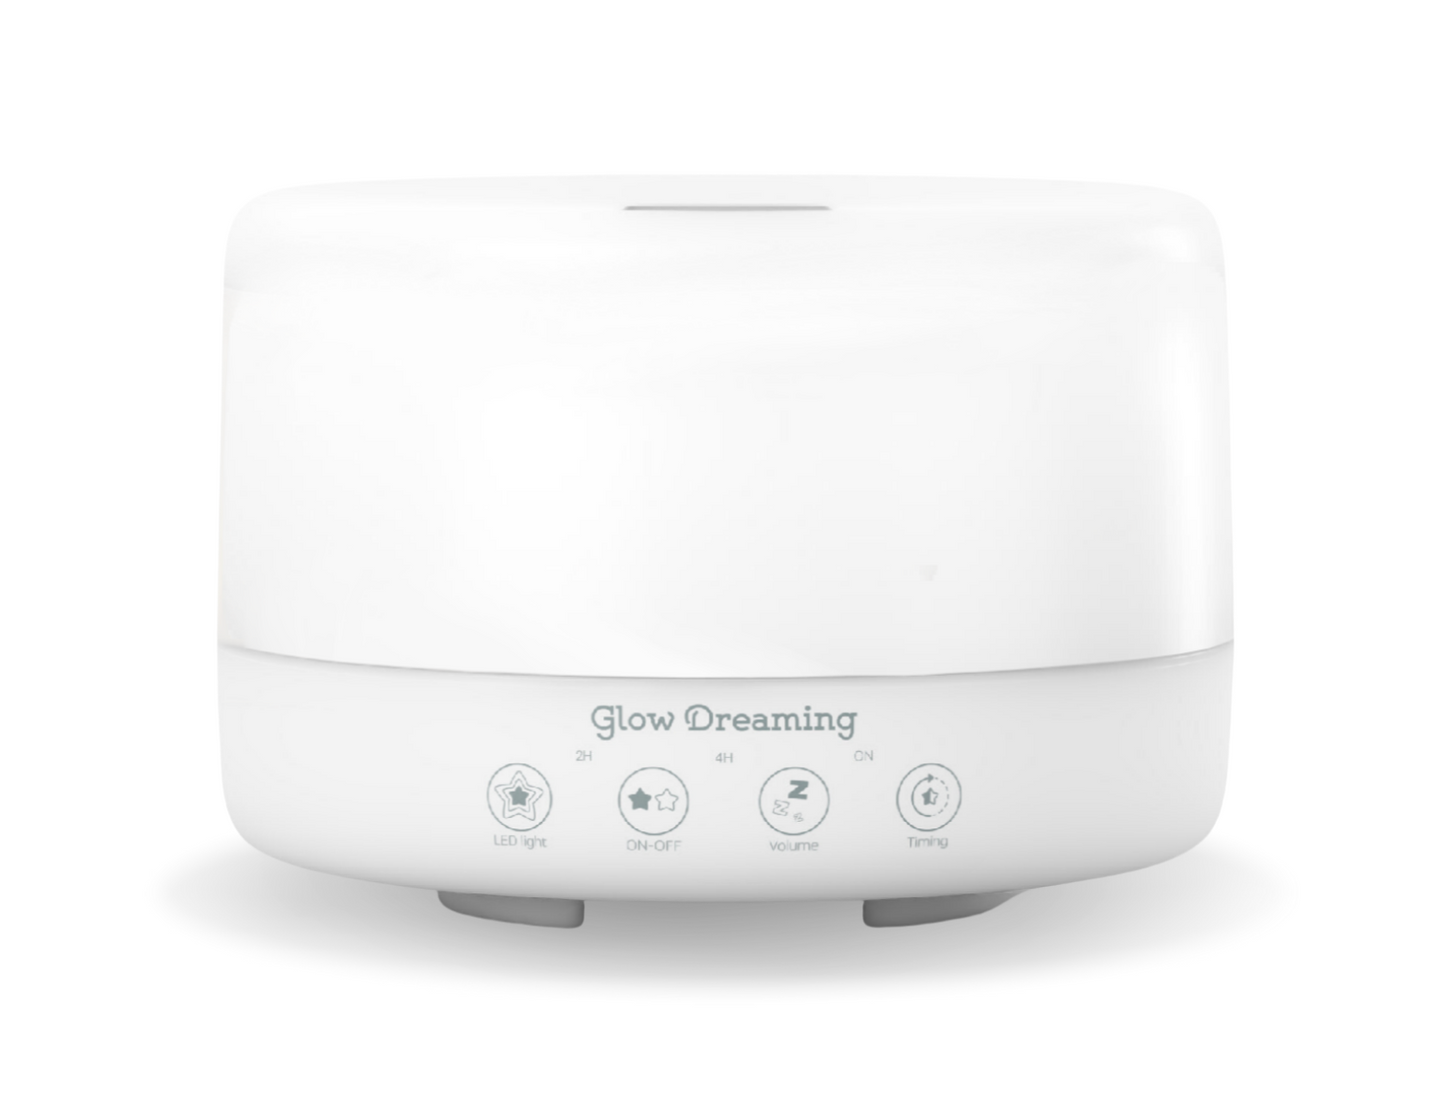 Glow Dreaming Sleep Aid (Previous Model) - SOLD OUT